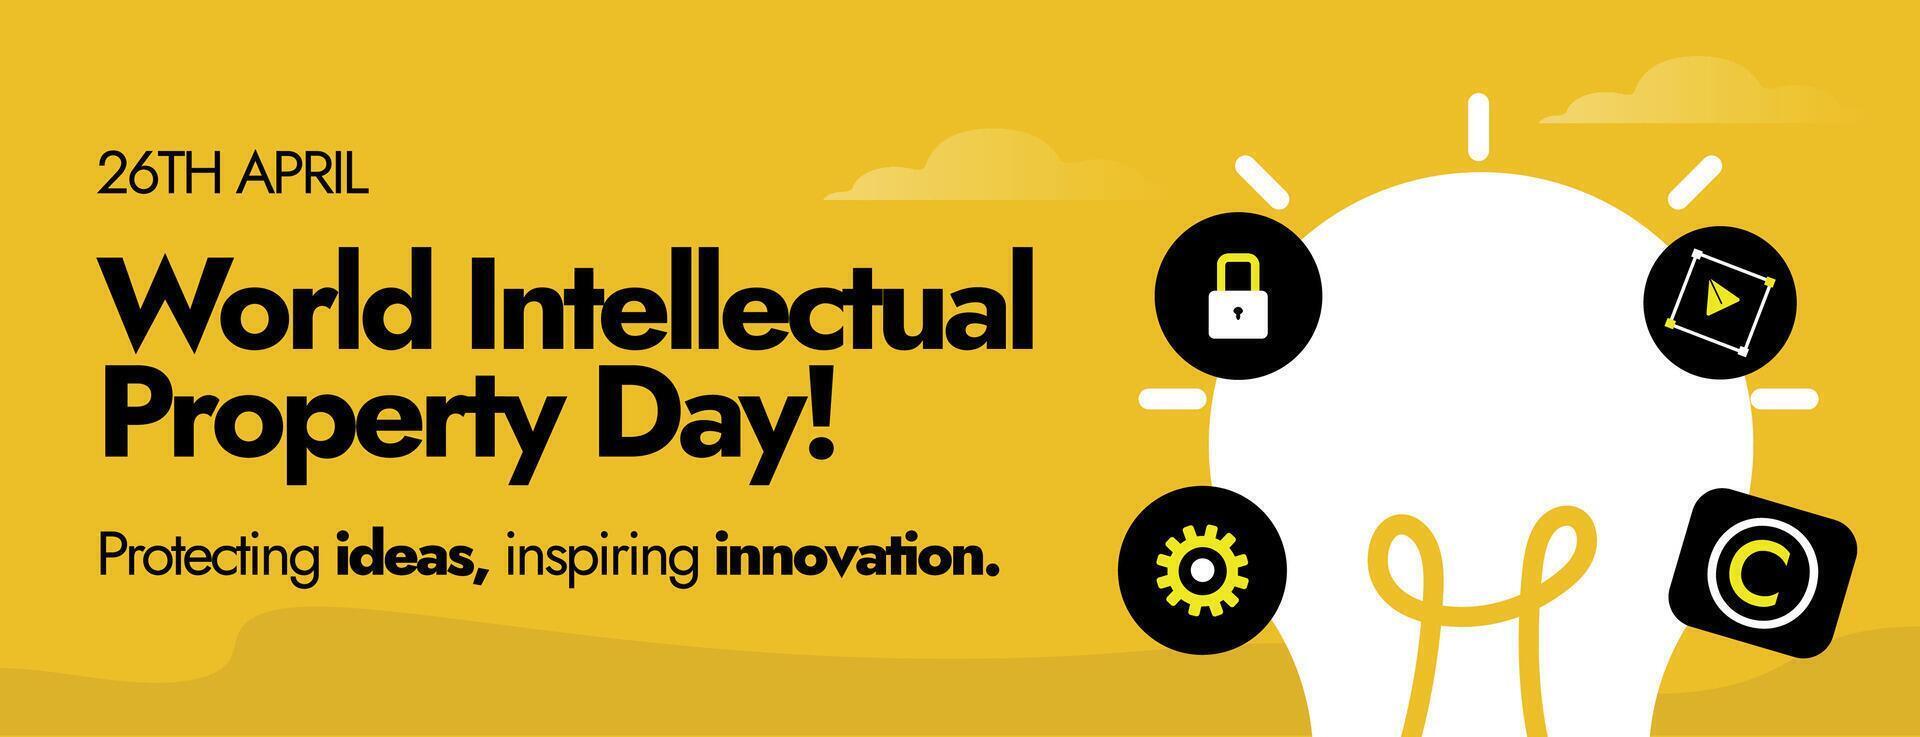 26th April World Intellectual Property day. World Intellectual property day celebration cover to promote the importance of balanced IP. Building our common future with innovation and creativity. vector